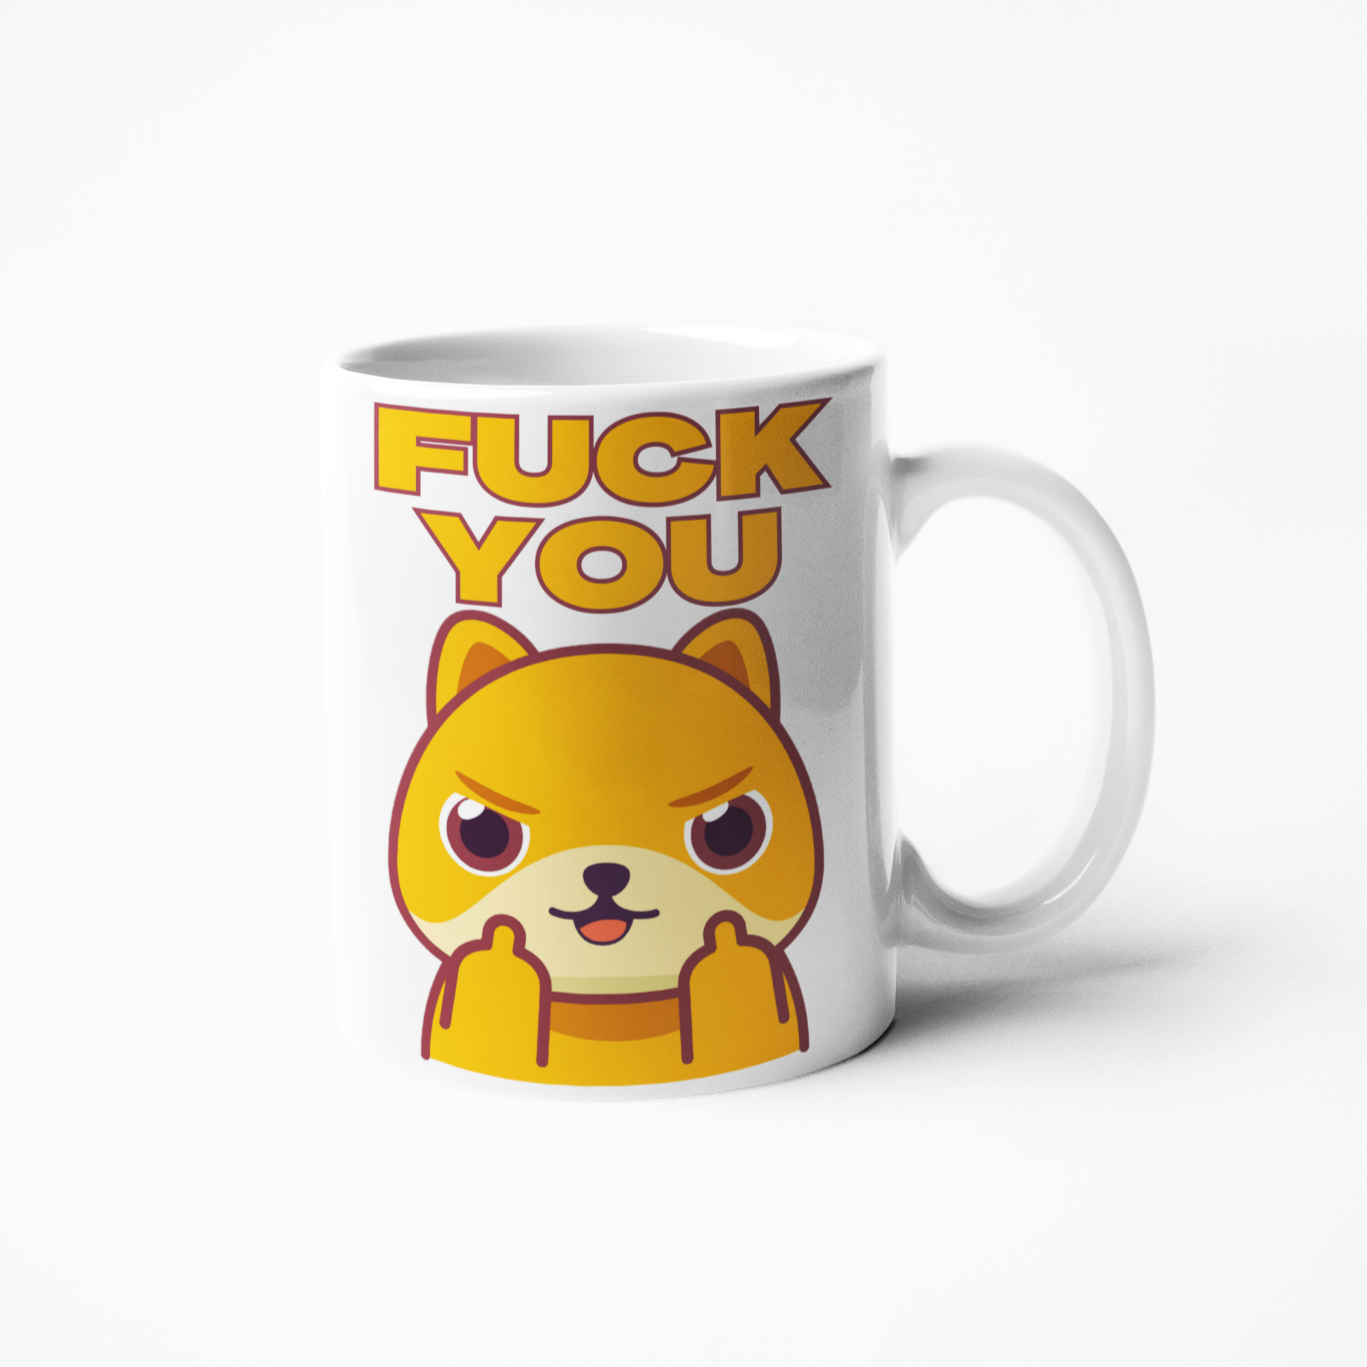 Fuel your rebellious spirit with this classic Fuck you middle finger swearing fox funny coffee mug! Invoke your wilder side and challenge convention with this daring piece. Let your mug be your statement of nonconformity and boldness! Live loud and wild!